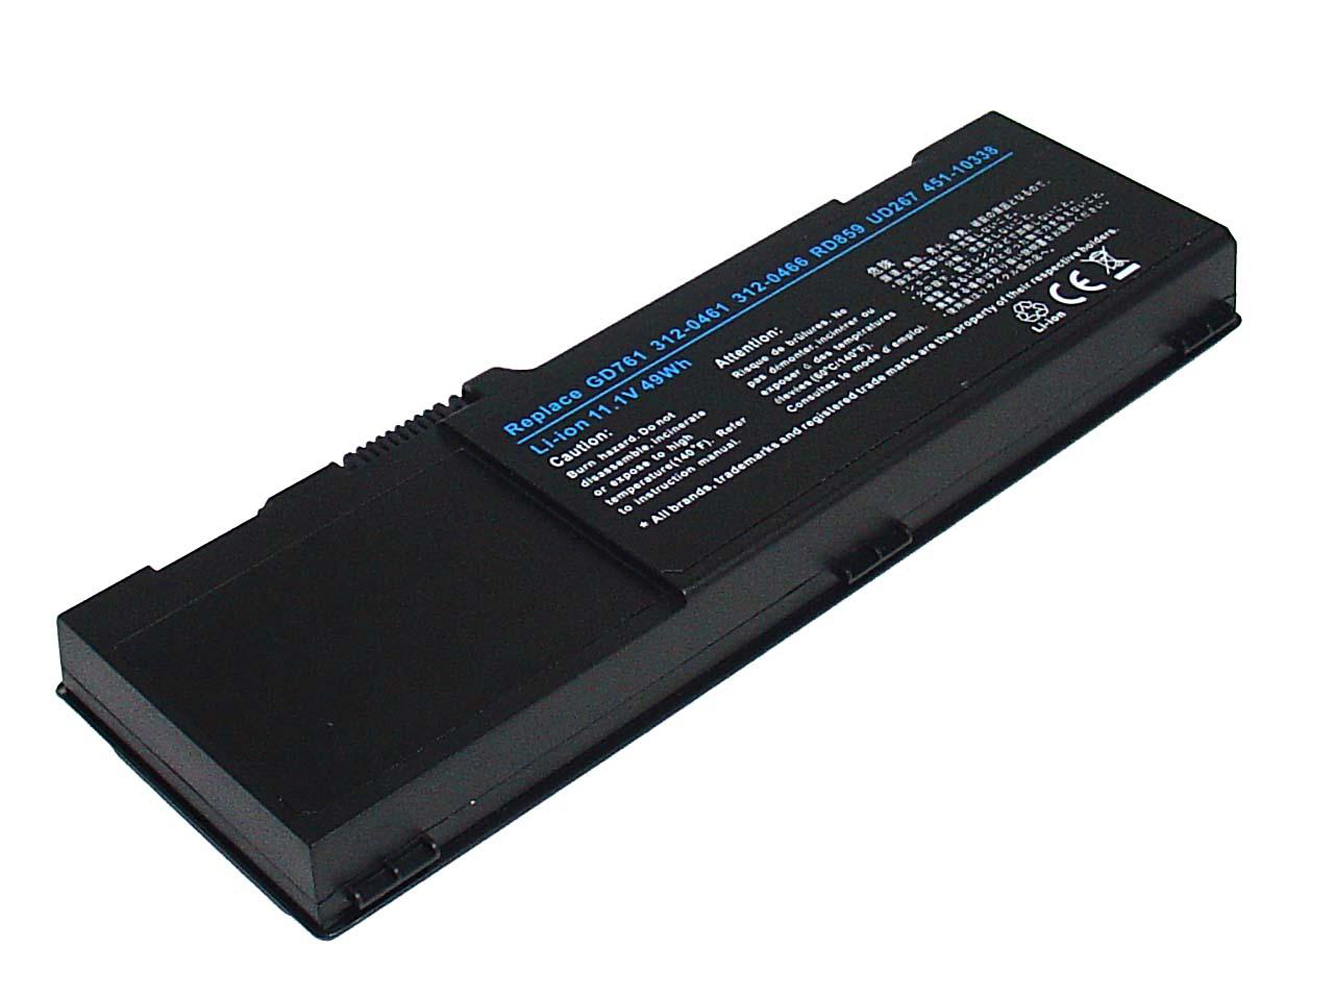 Replacement for Dell Inspiron 1501, Inspiron 6400, Inspiron E1505, Inspiron PP20L, Inspiron PP23LA, Latitude 131L, Vostro 1000 Laptop Battery